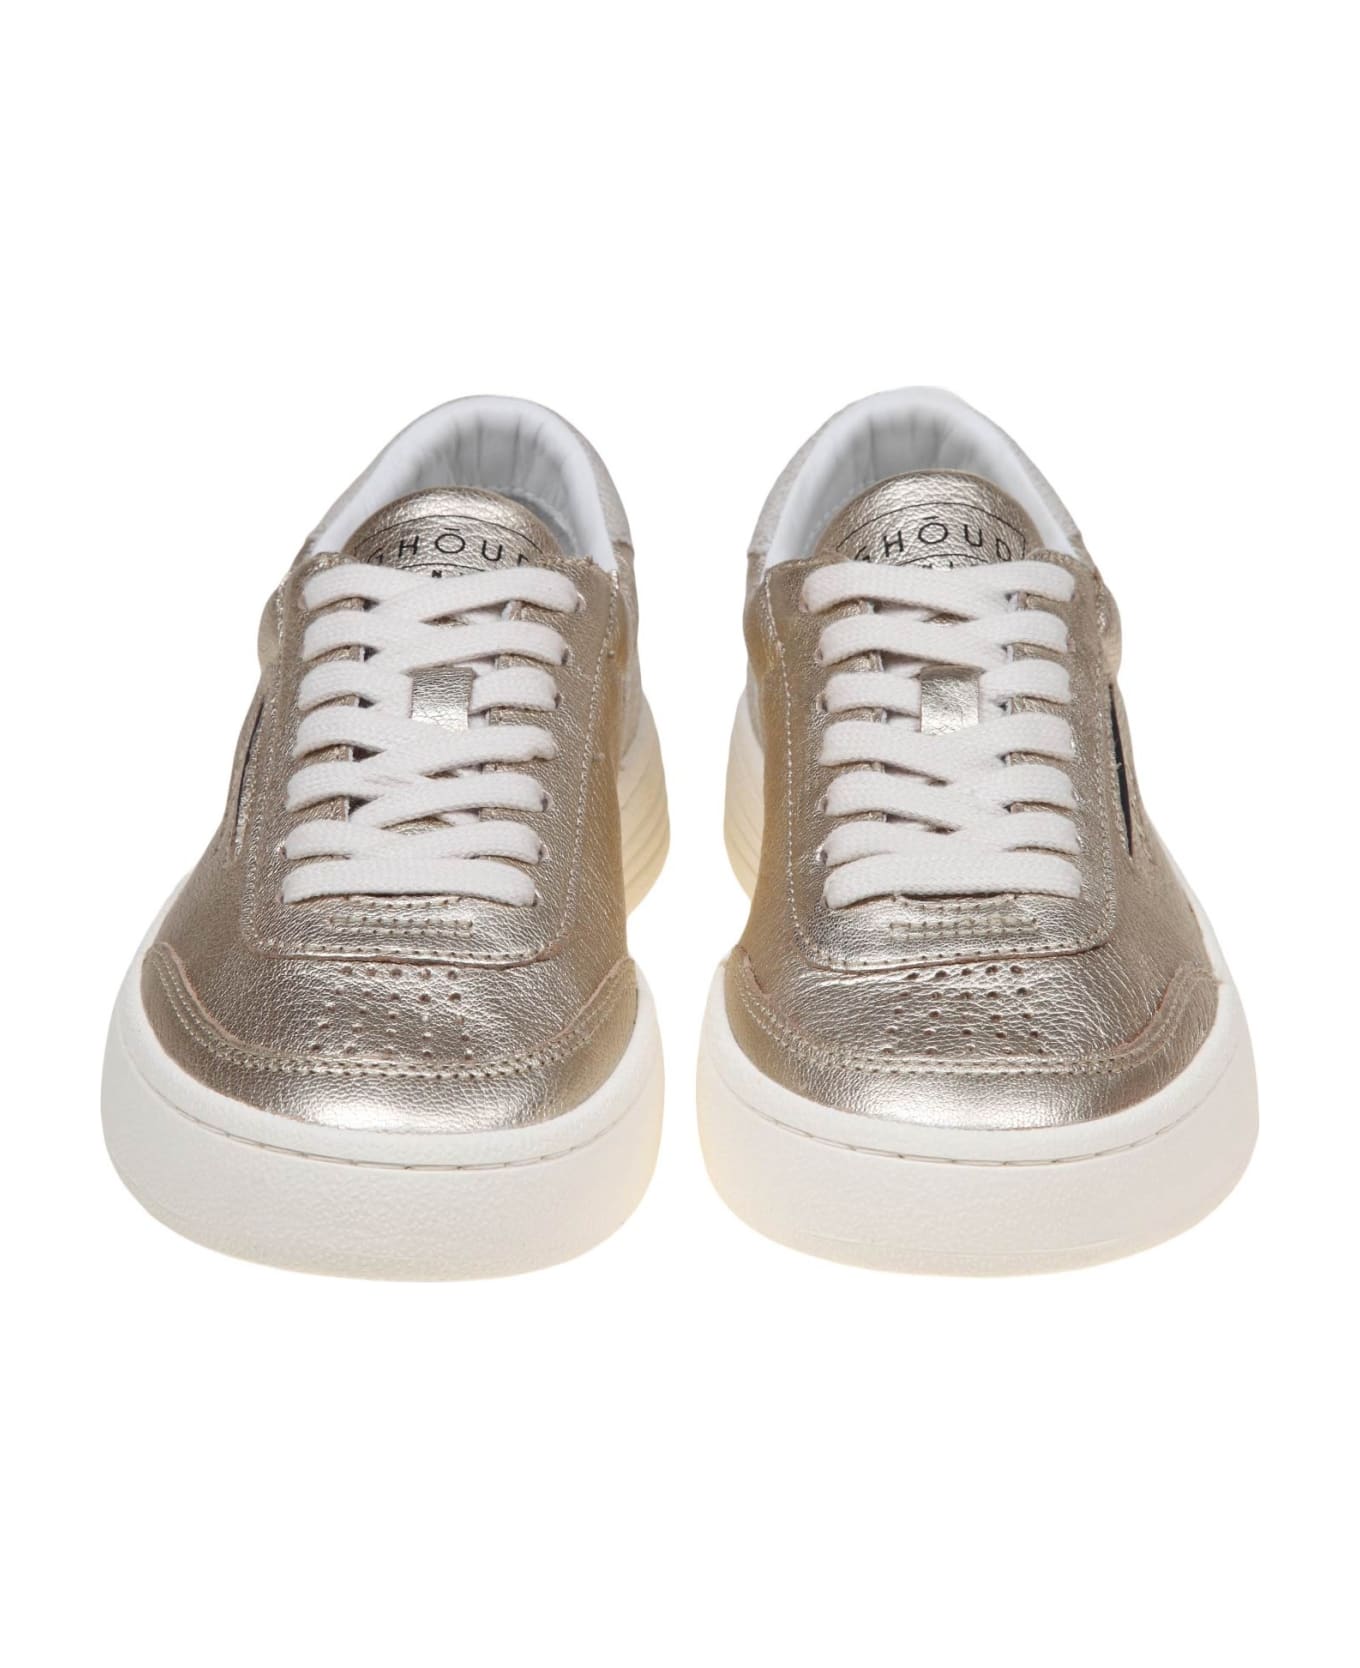 GHOUD Lido Low Sneakers In Platinum Color Leather - GOLD